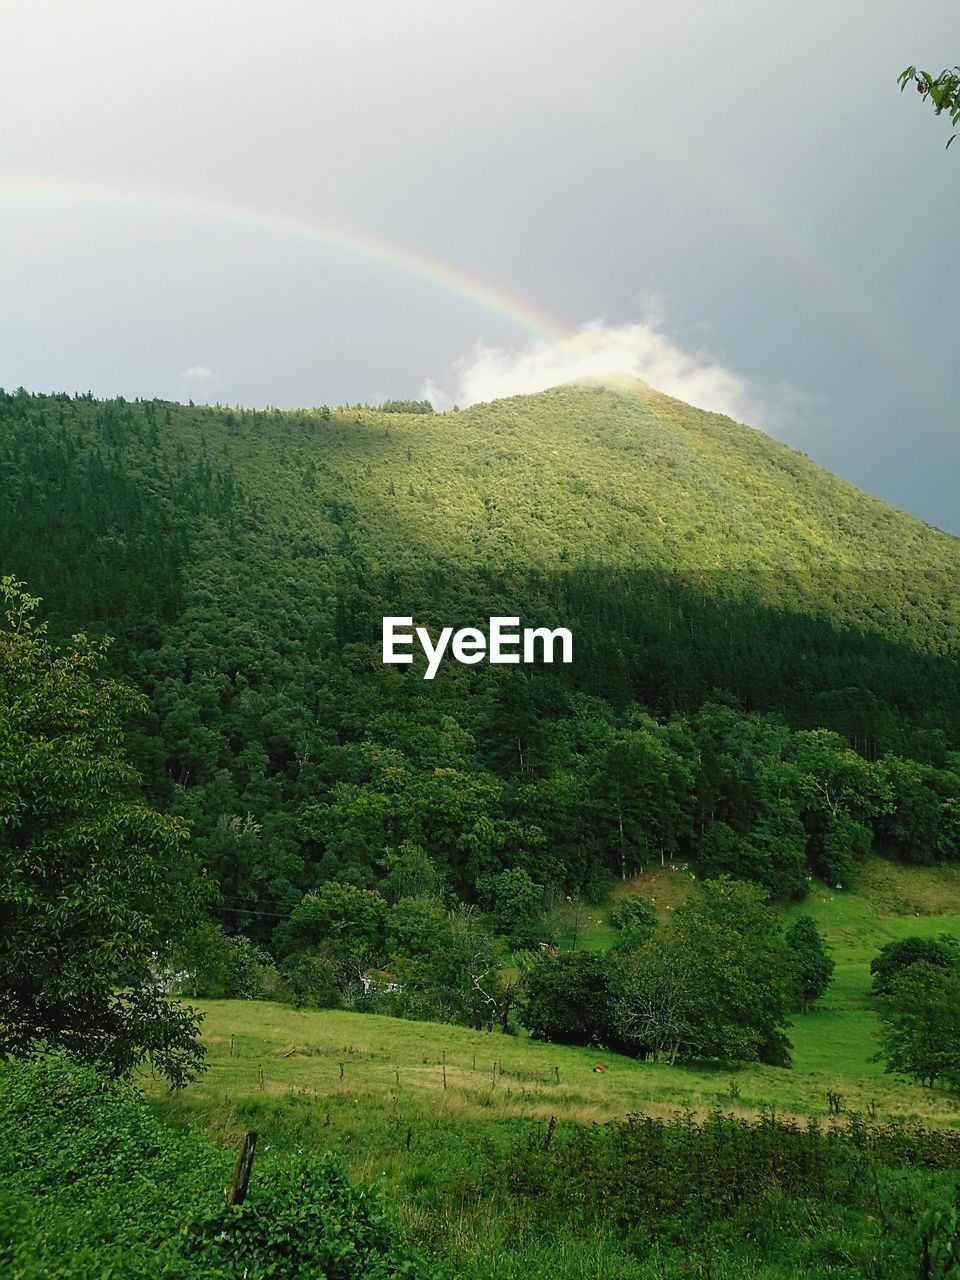 SCENIC VIEW OF GREEN LANDSCAPE AGAINST RAINBOW